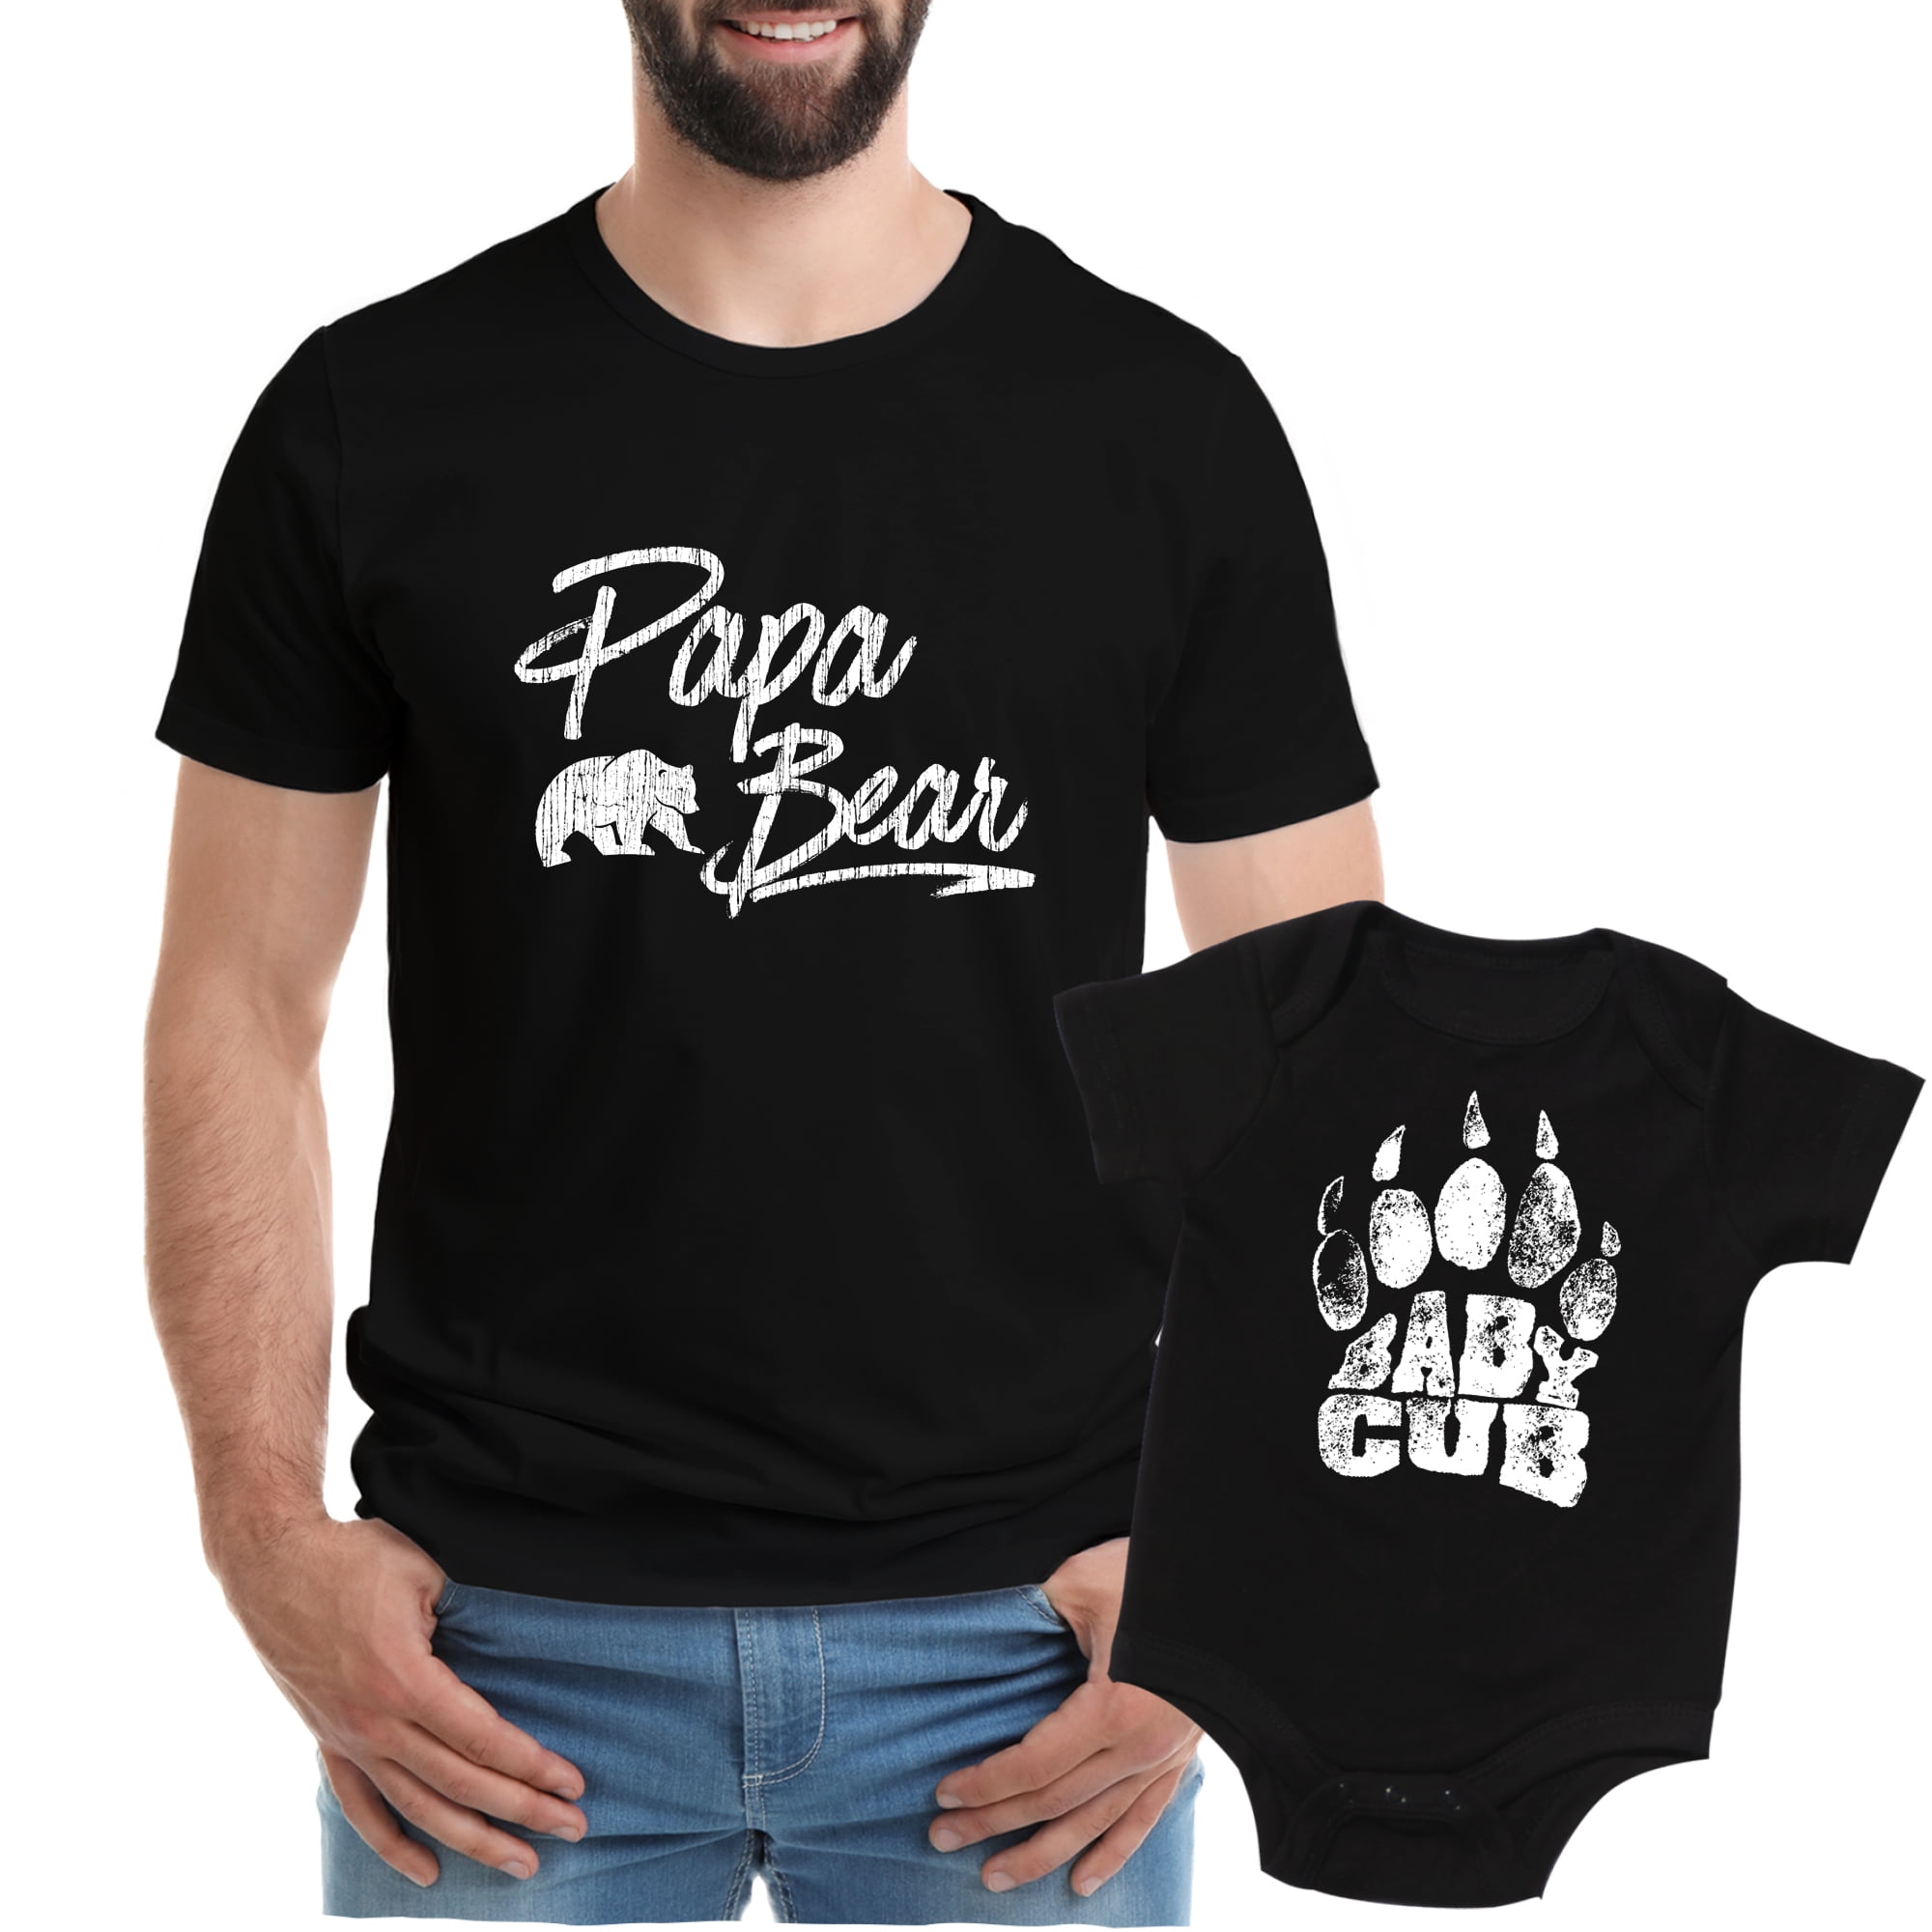 Matching family shirts for pictures Mother and child shirts mama bear papa bear Cute kid tee Unisex Little bear t-shirt for kids